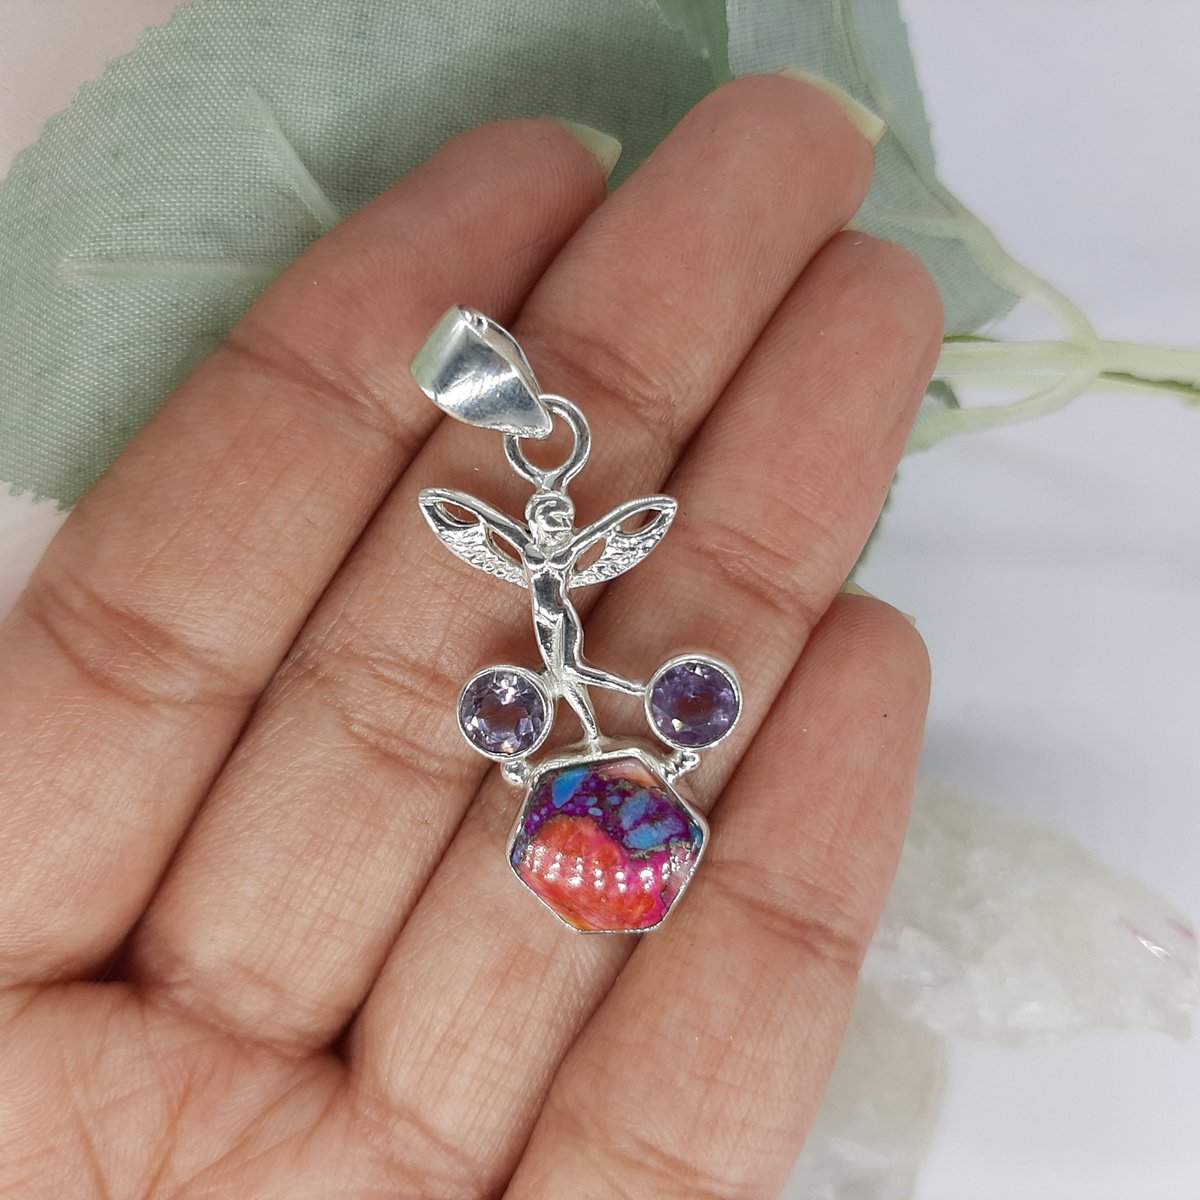 925 sterling silver statement pendant 😍
.
.
.
.
#turquoisependant #wholesalependant #spinyoyster #valentineday #valentineday #retailers #businessideas #jewelrybusiness #amethyst #925sterlingsilverjewelry #silverjewelry #statementpendant #statementjewelry